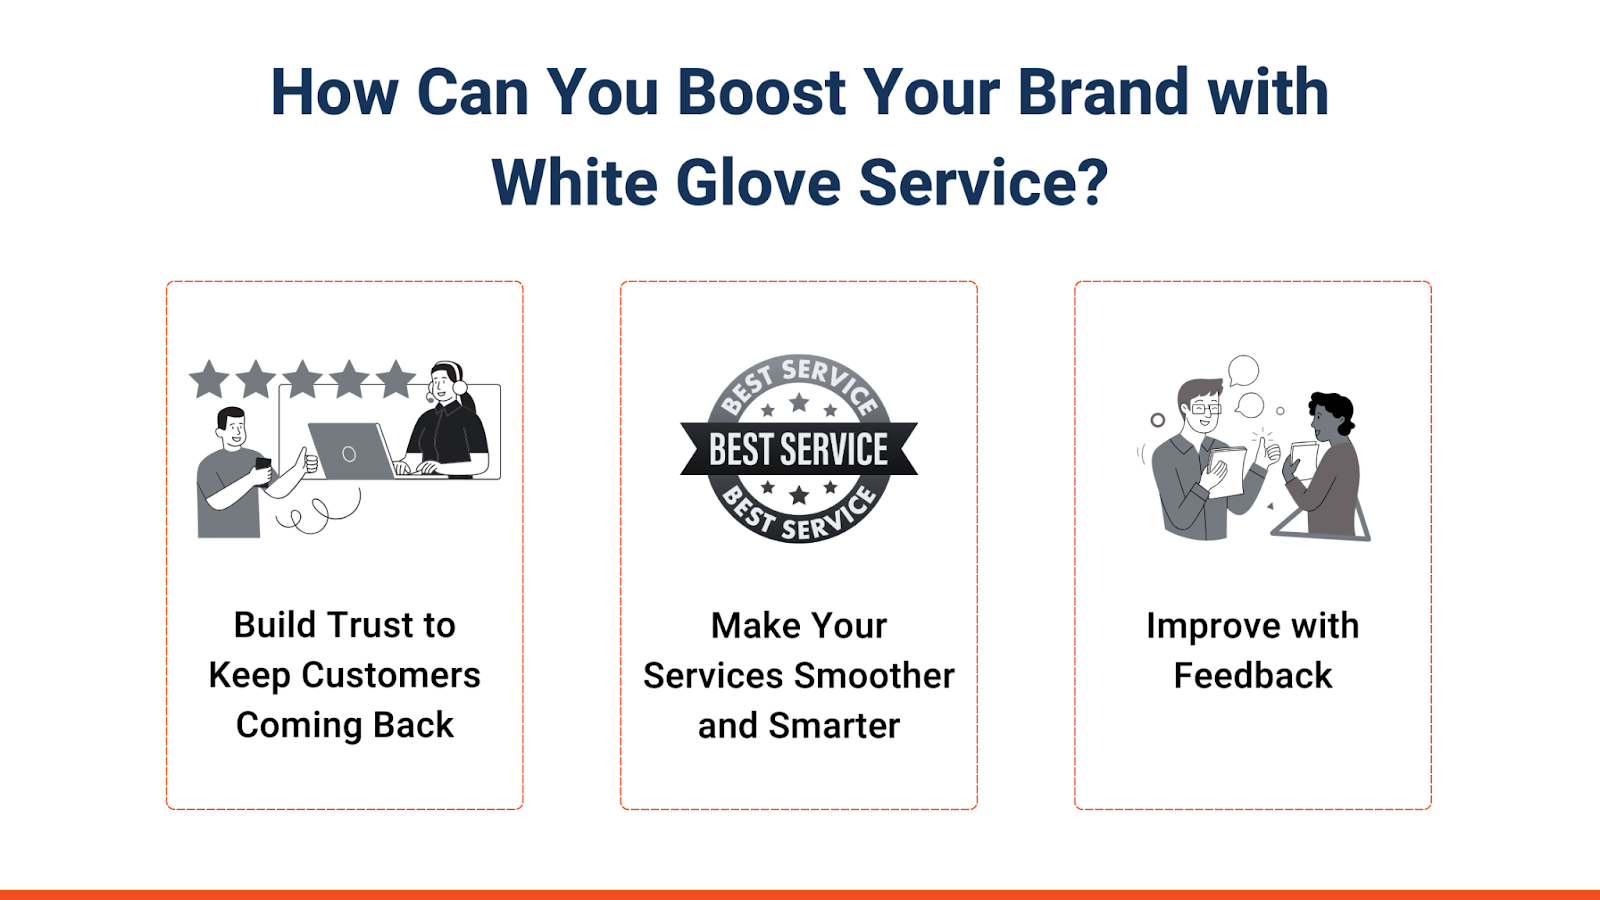 Boost Your Brand with White Glove